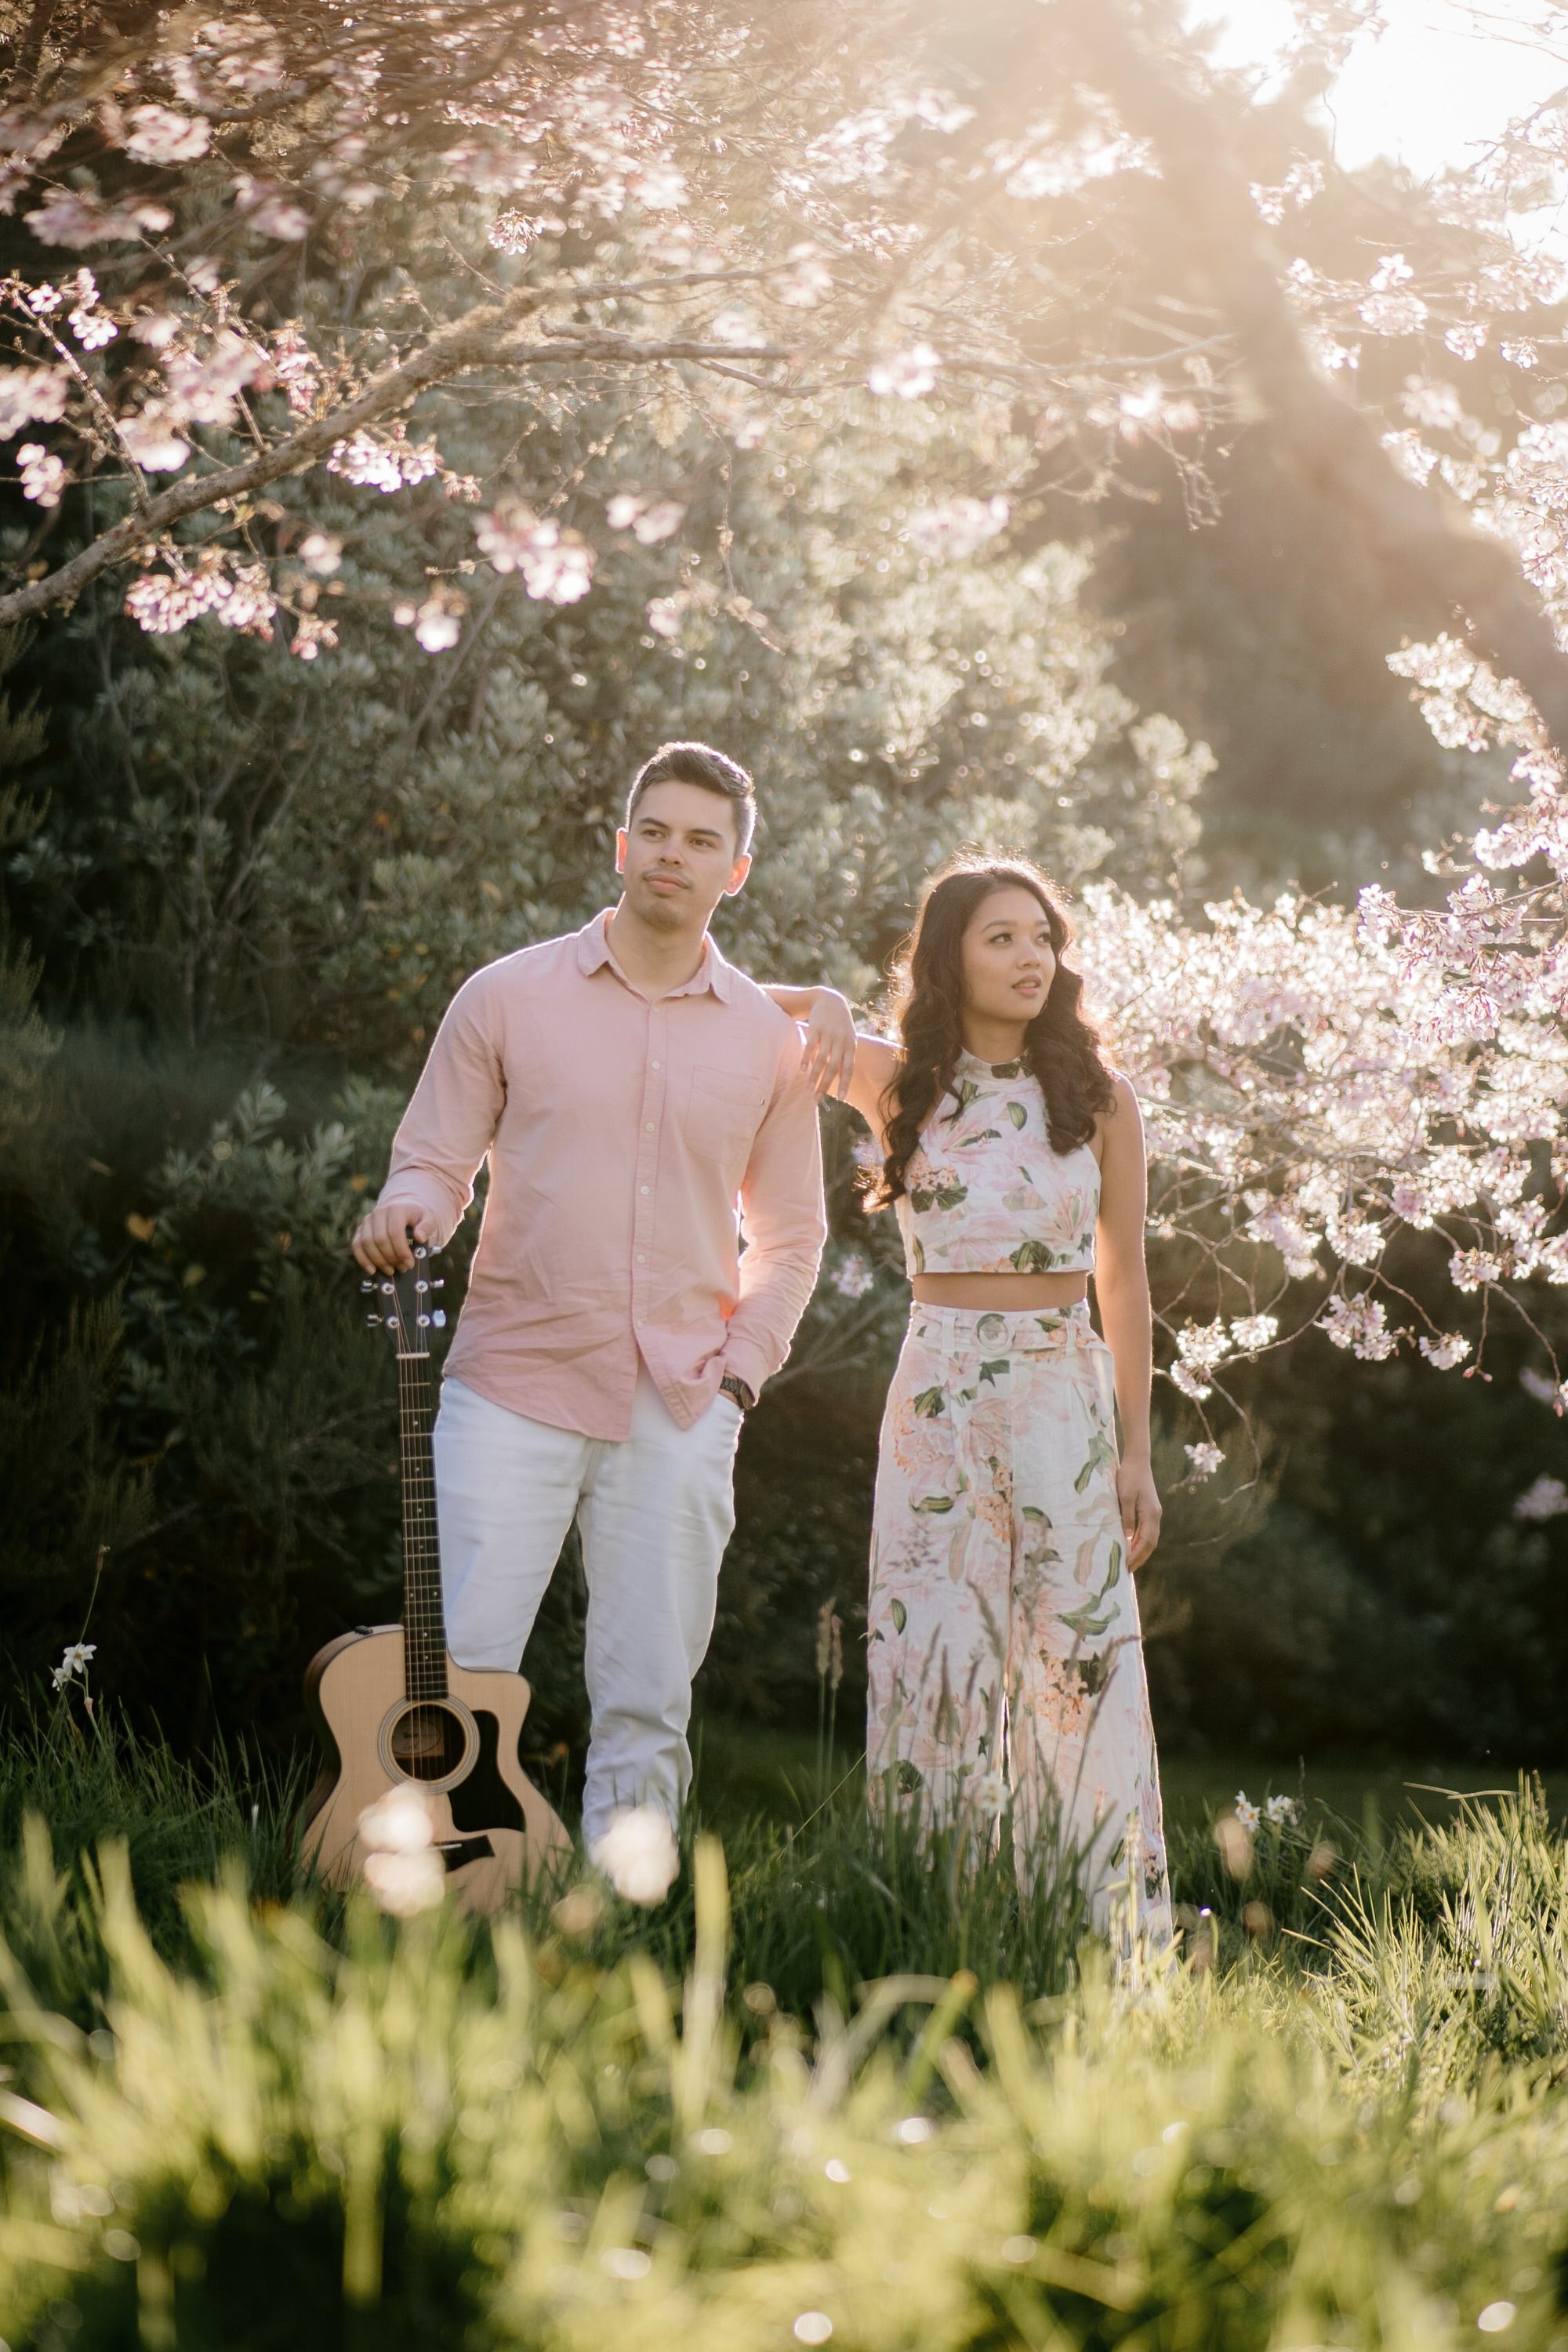 nate-and-thea-singers-duo-2023-top-auckland-wedding-phtographer-photography-videography-film-new-zealand-NZ-best-band-cherry-blossom-botanical-garden-engagement-elopement-dear-white-productions (66).jpg